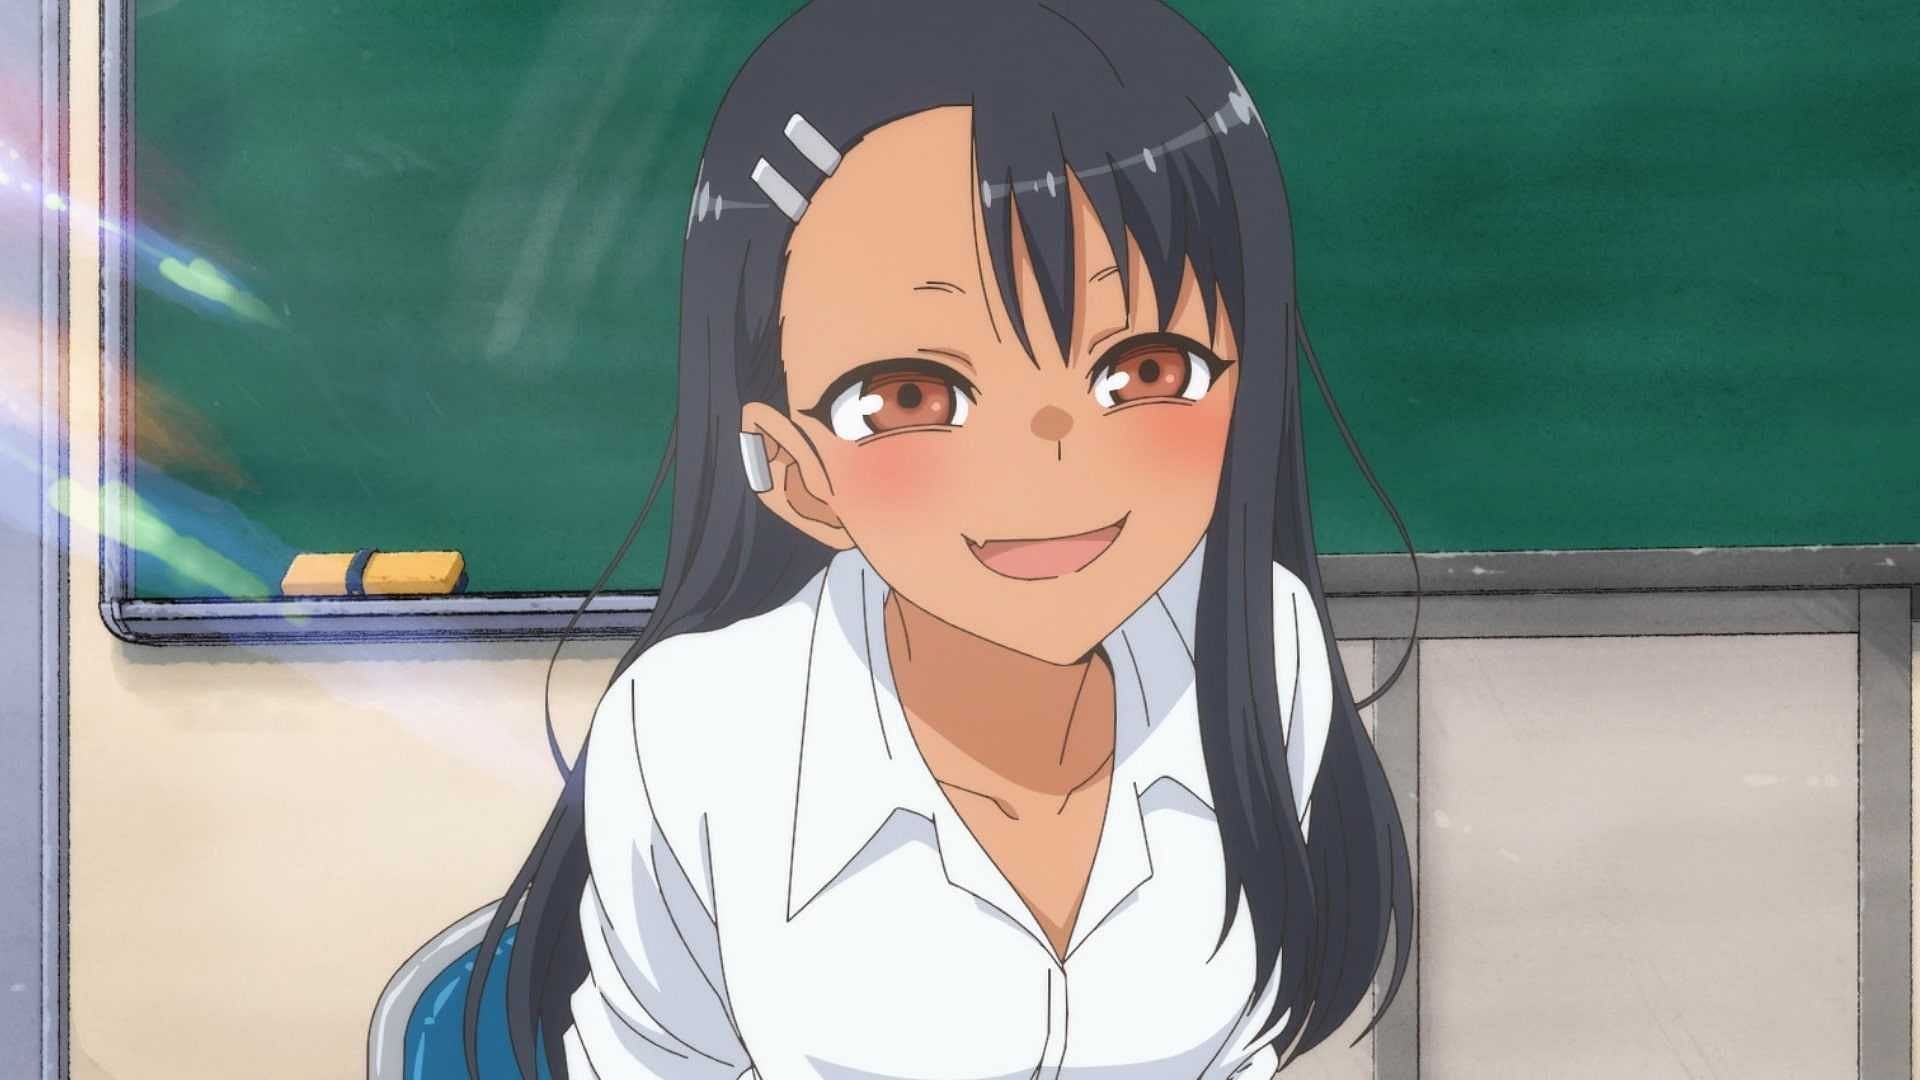 TV Time - Don't Toy With Me, Miss Nagatoro (TVShow Time)